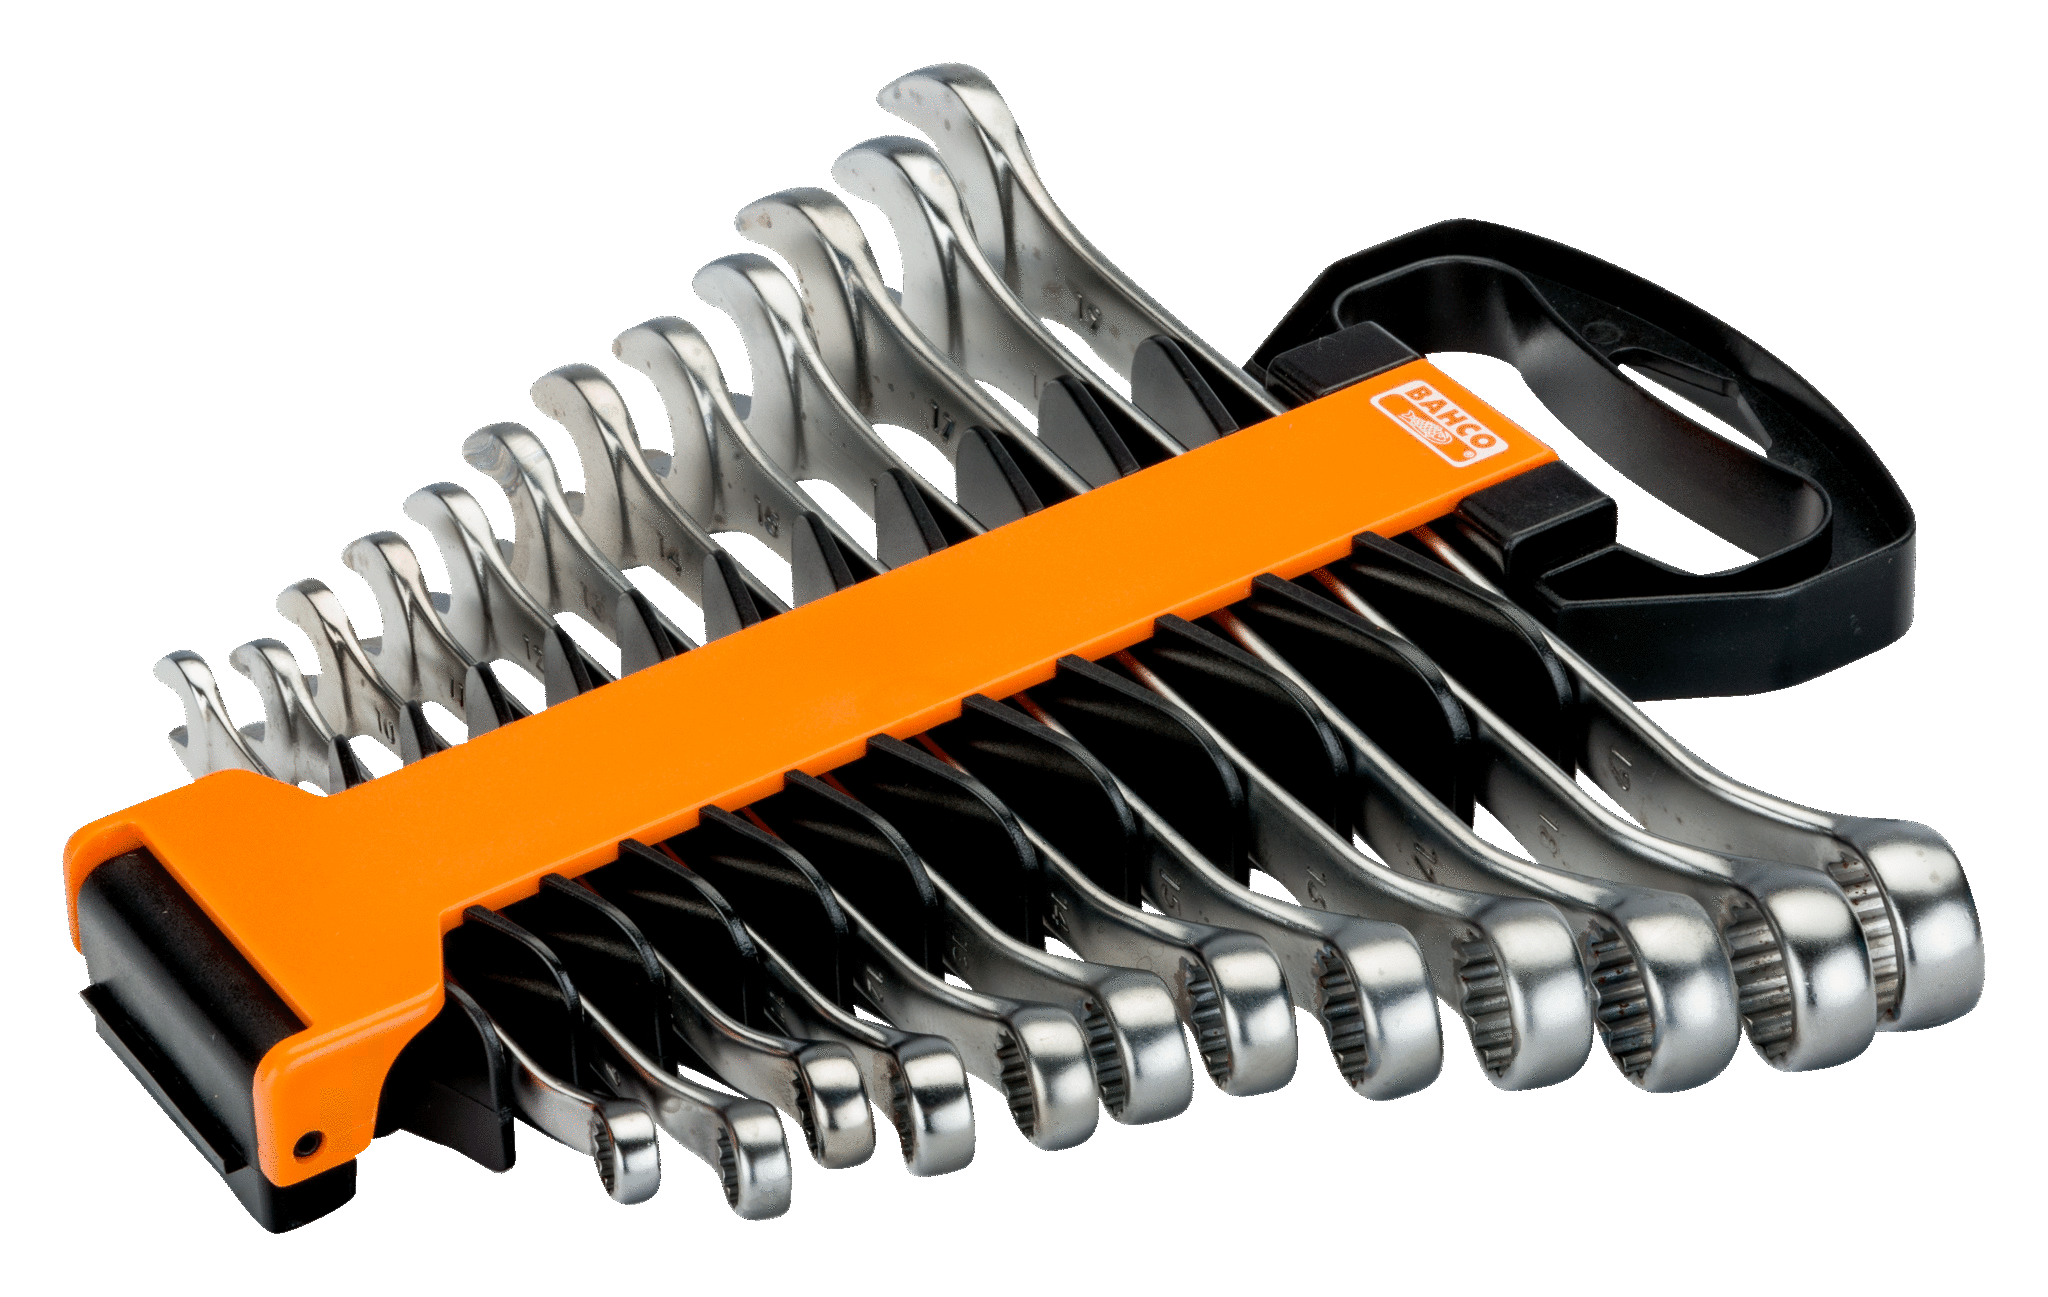 BAHCO 1952M/SH12 Metric Offset Combination Wrench Set - Premium Offset Combination Wrench Set from BAHCO - Shop now at Yew Aik.